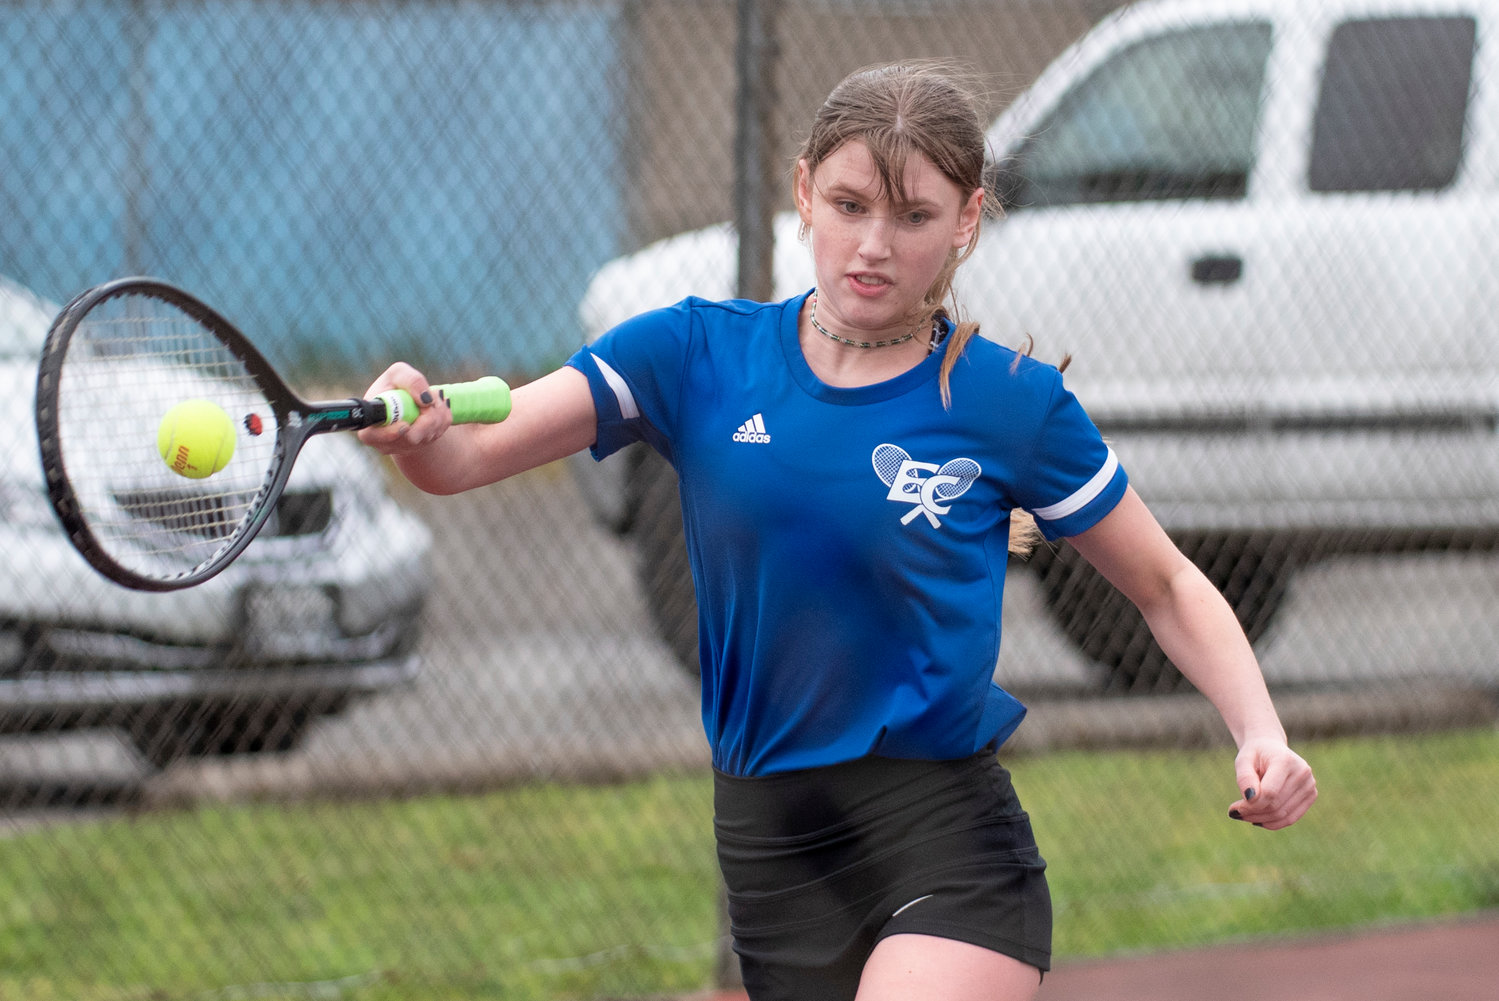 Eatonville's No. 1 singles player returns a hit from Tenino's Megan Letts during a game in Tenino on March 29.